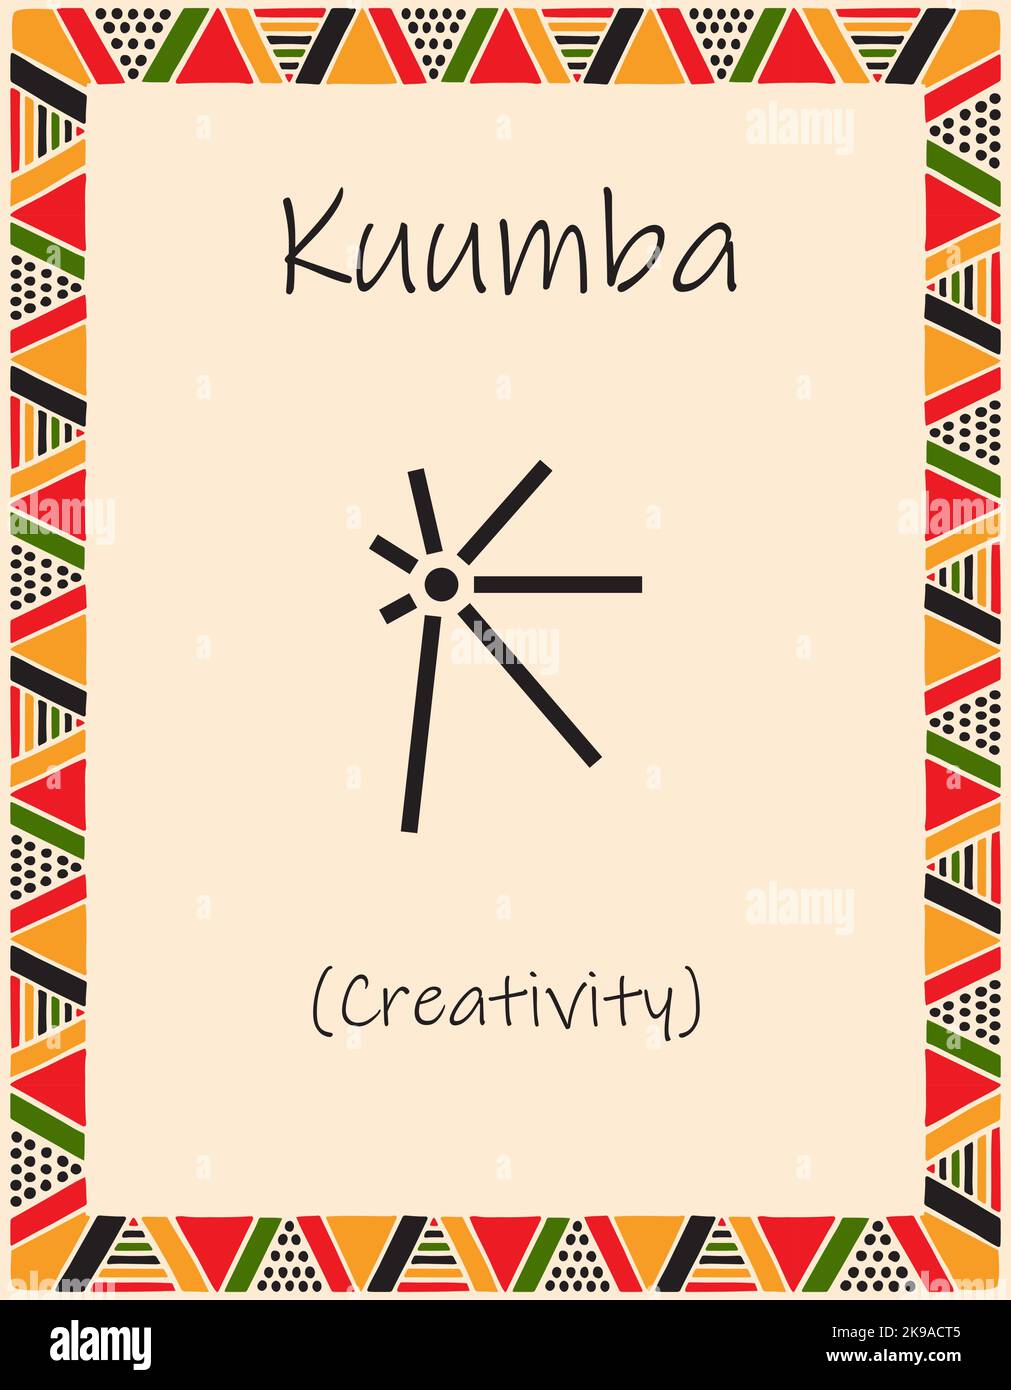 A card with one of the Kwanzaa principles. Symbol Kuumba means Creativity in Swahili. Poster with an ethnic African pattern in traditional colors. Vec Stock Vector